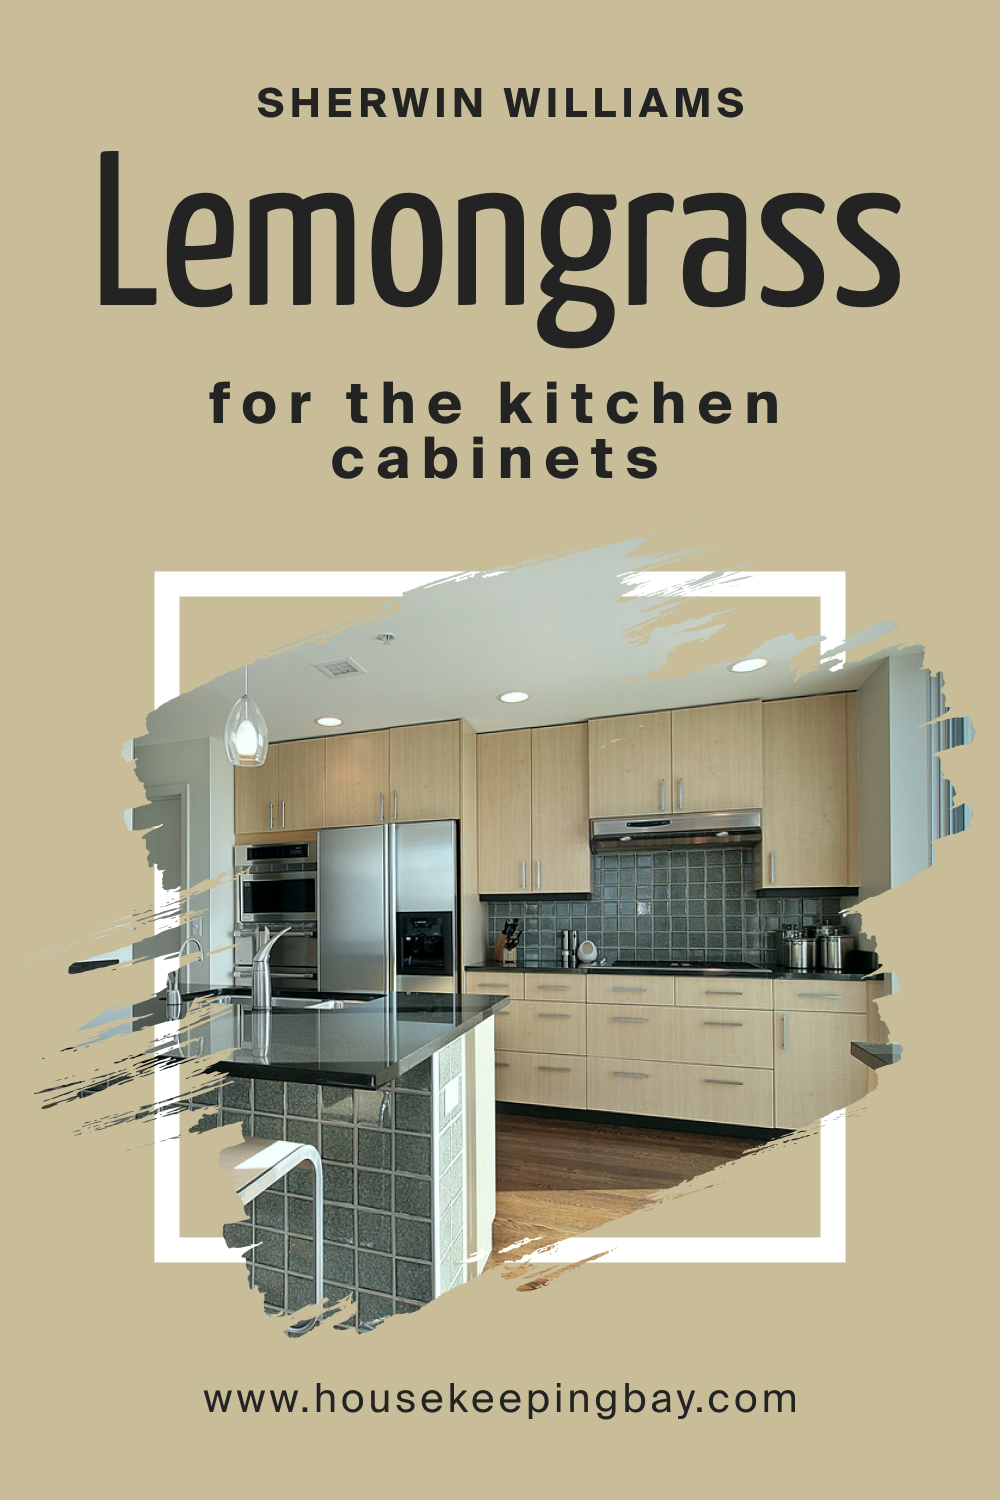 Sherwin Williams. SW 7732 Lemongrass For the Kitchen Cabinets